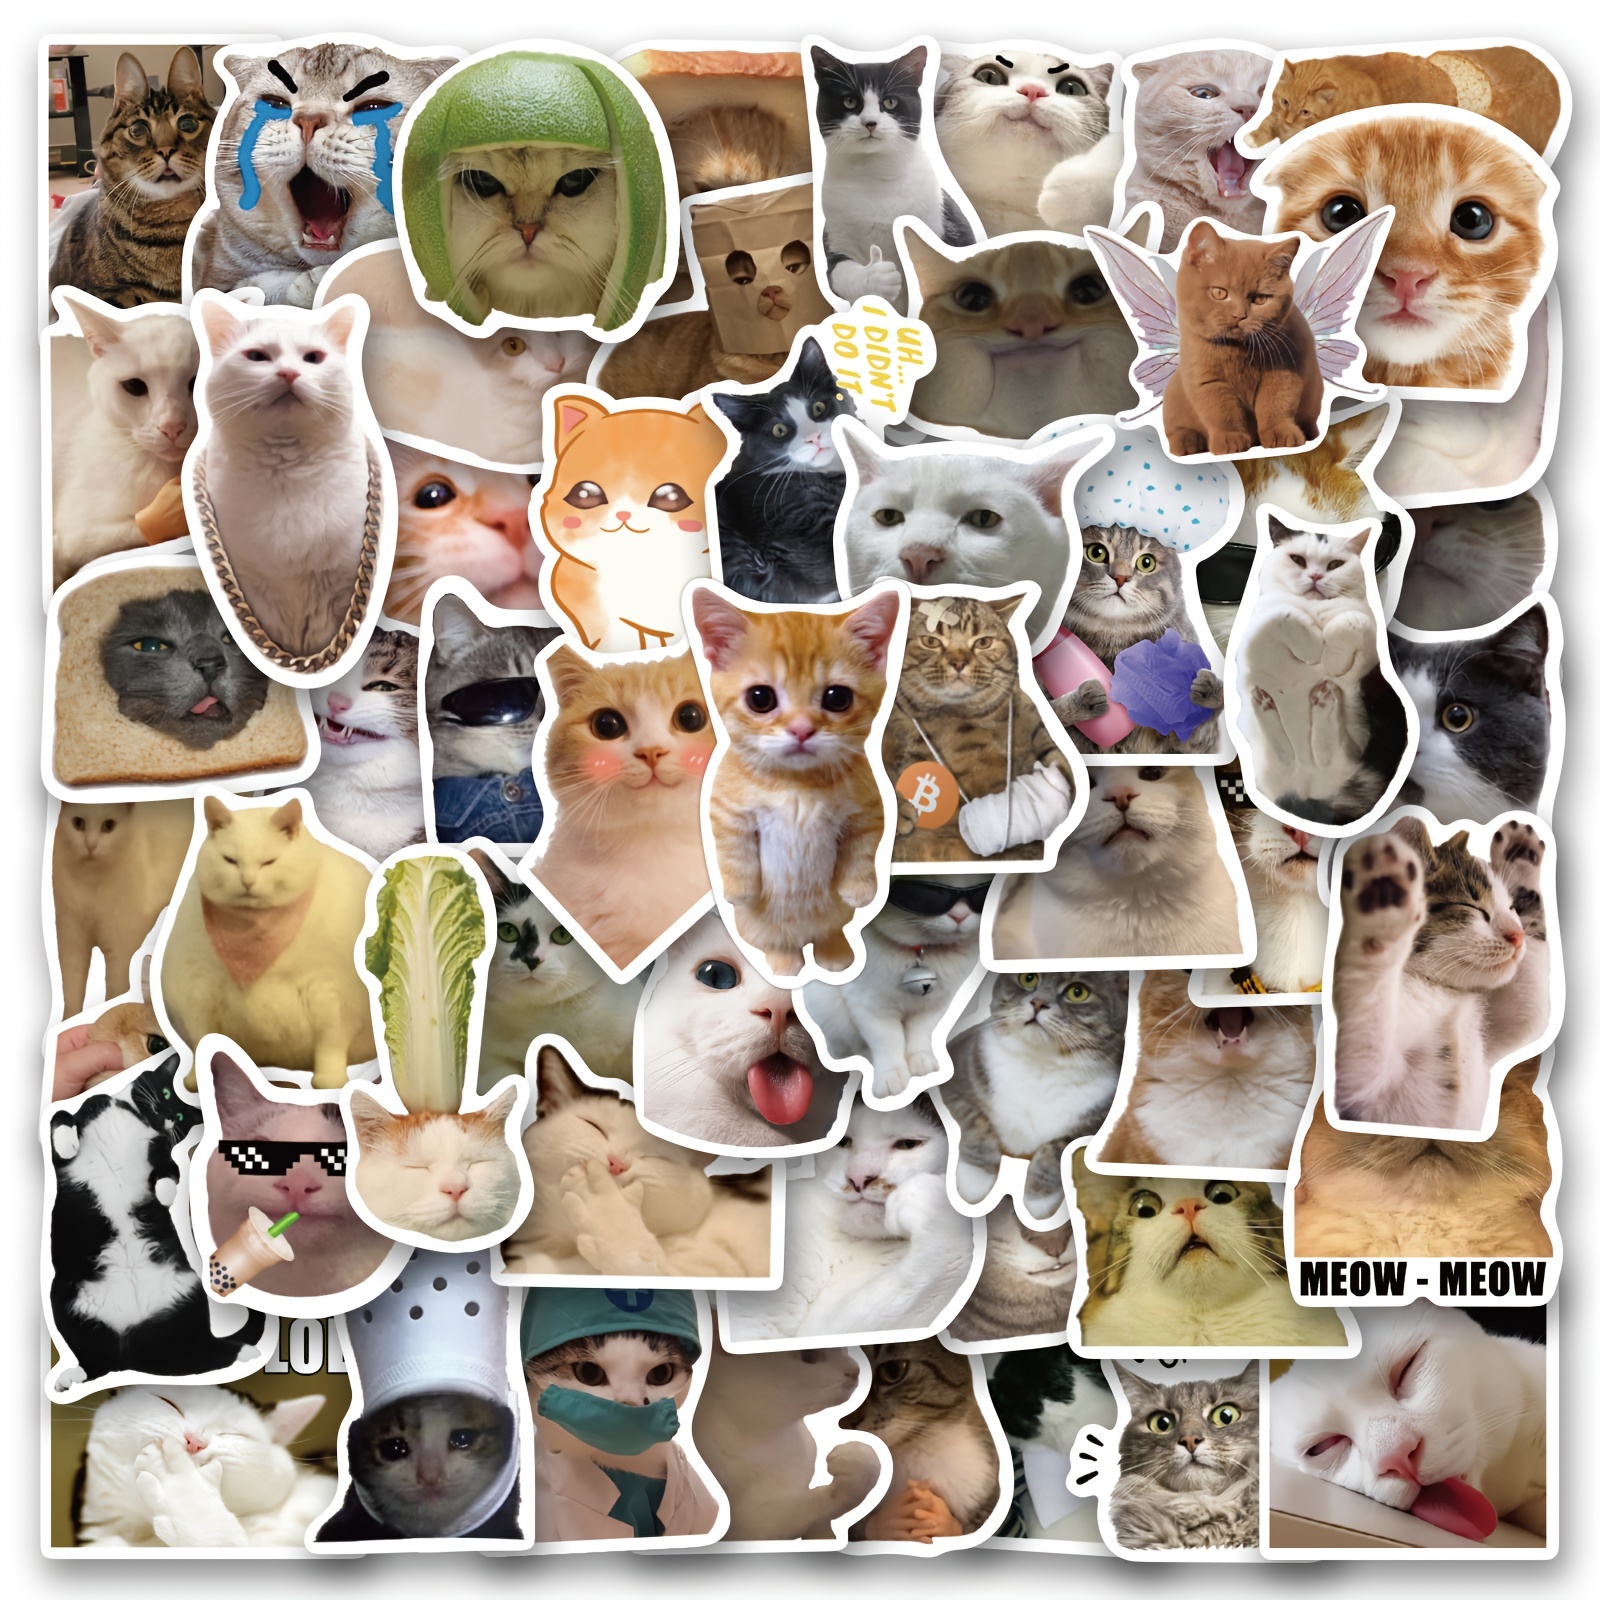 Pack 3 Pcs Sticker - Funny Cat Face - Cute Kitty Cat Meme Sticker Decals for